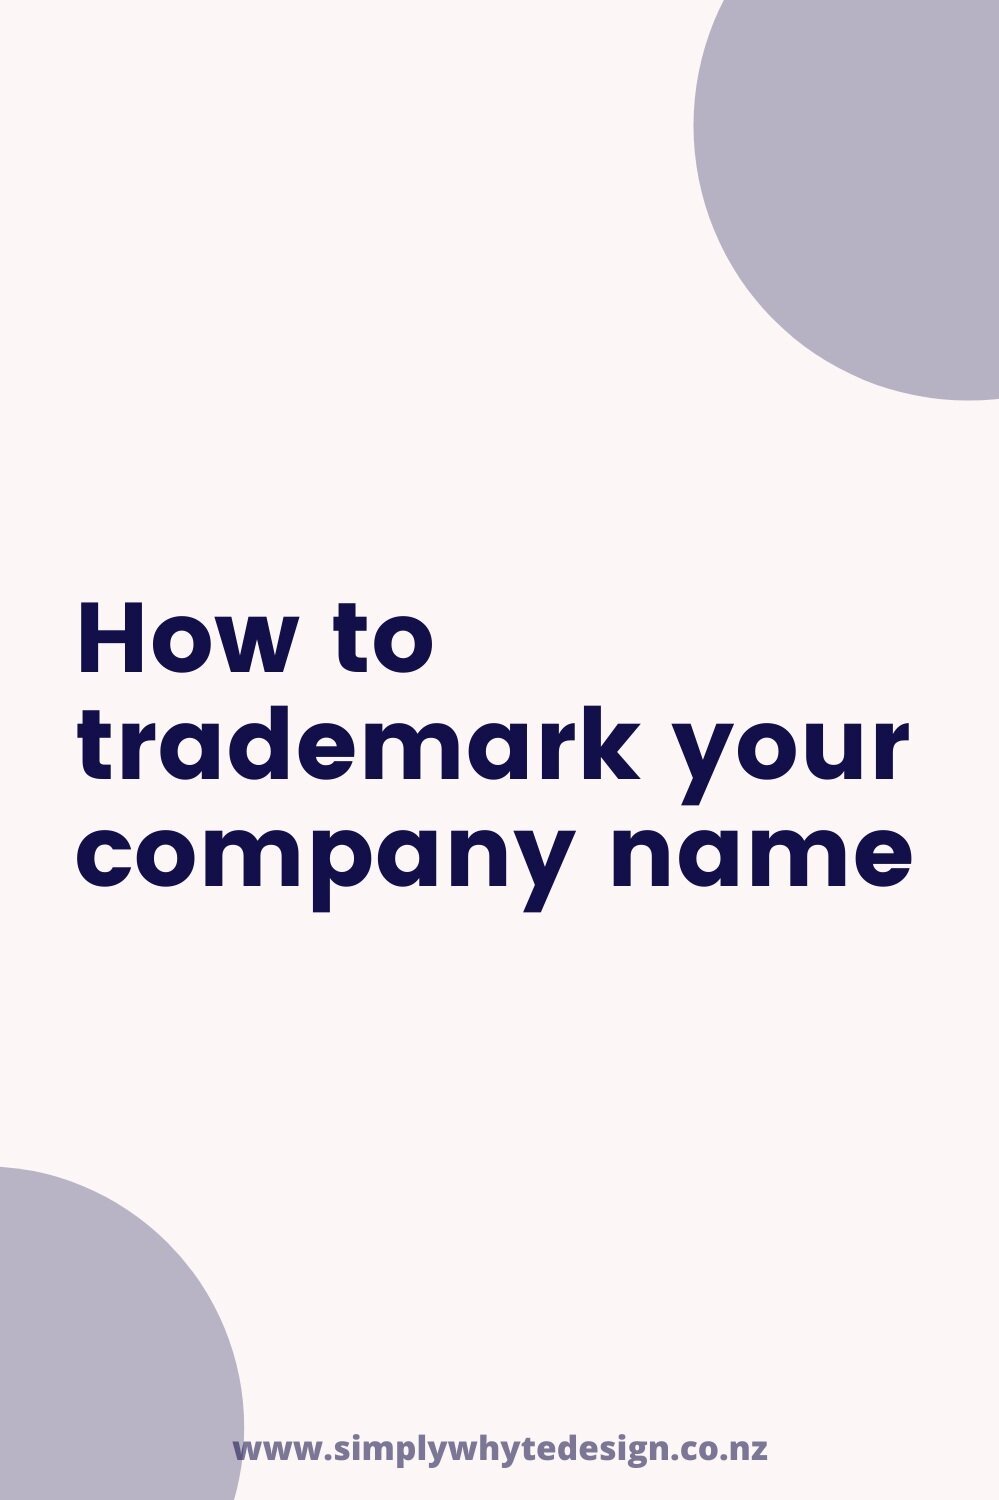 How+to+trademark+your+company+name.jpg